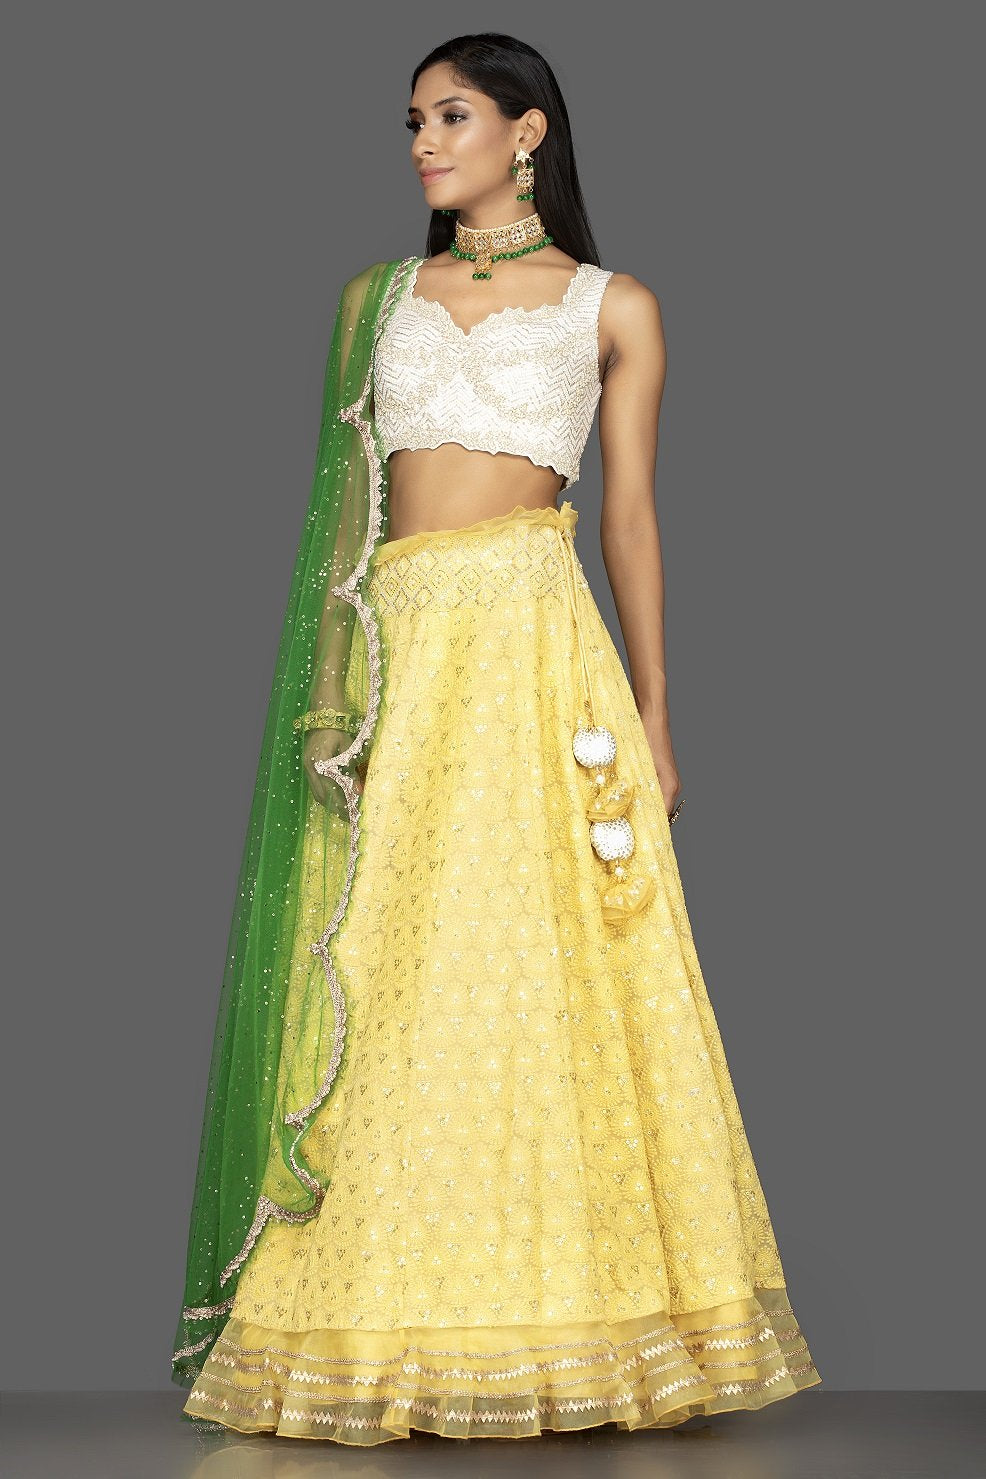 Shop beautiful yellow and off-white Lucknowi work georgette lehenga online in USA with green net dupatta. Look radiant on weddings and special occasions in splendid designer lehengas crafted with finest embroideries and stunning silhouettes from Pure Elegance Indian fashion boutique in USA.-side